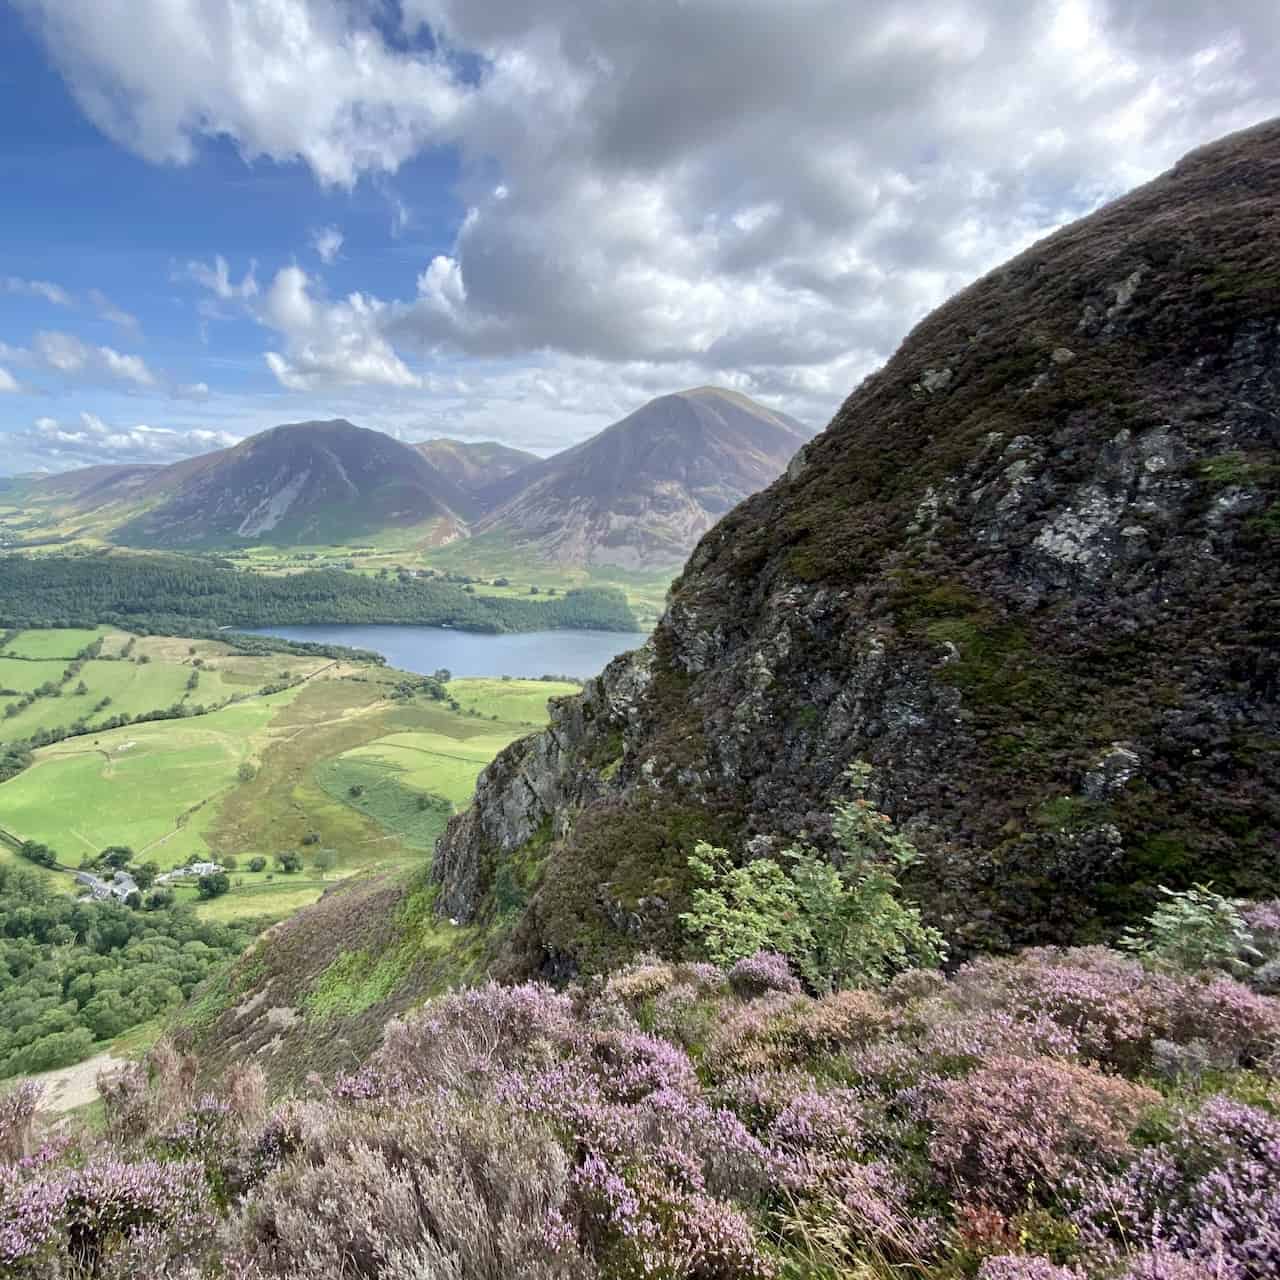 Crummock Water becomes visible during the climb with the peaks of Whiteside (left) and Grasmoor (right) in the background.